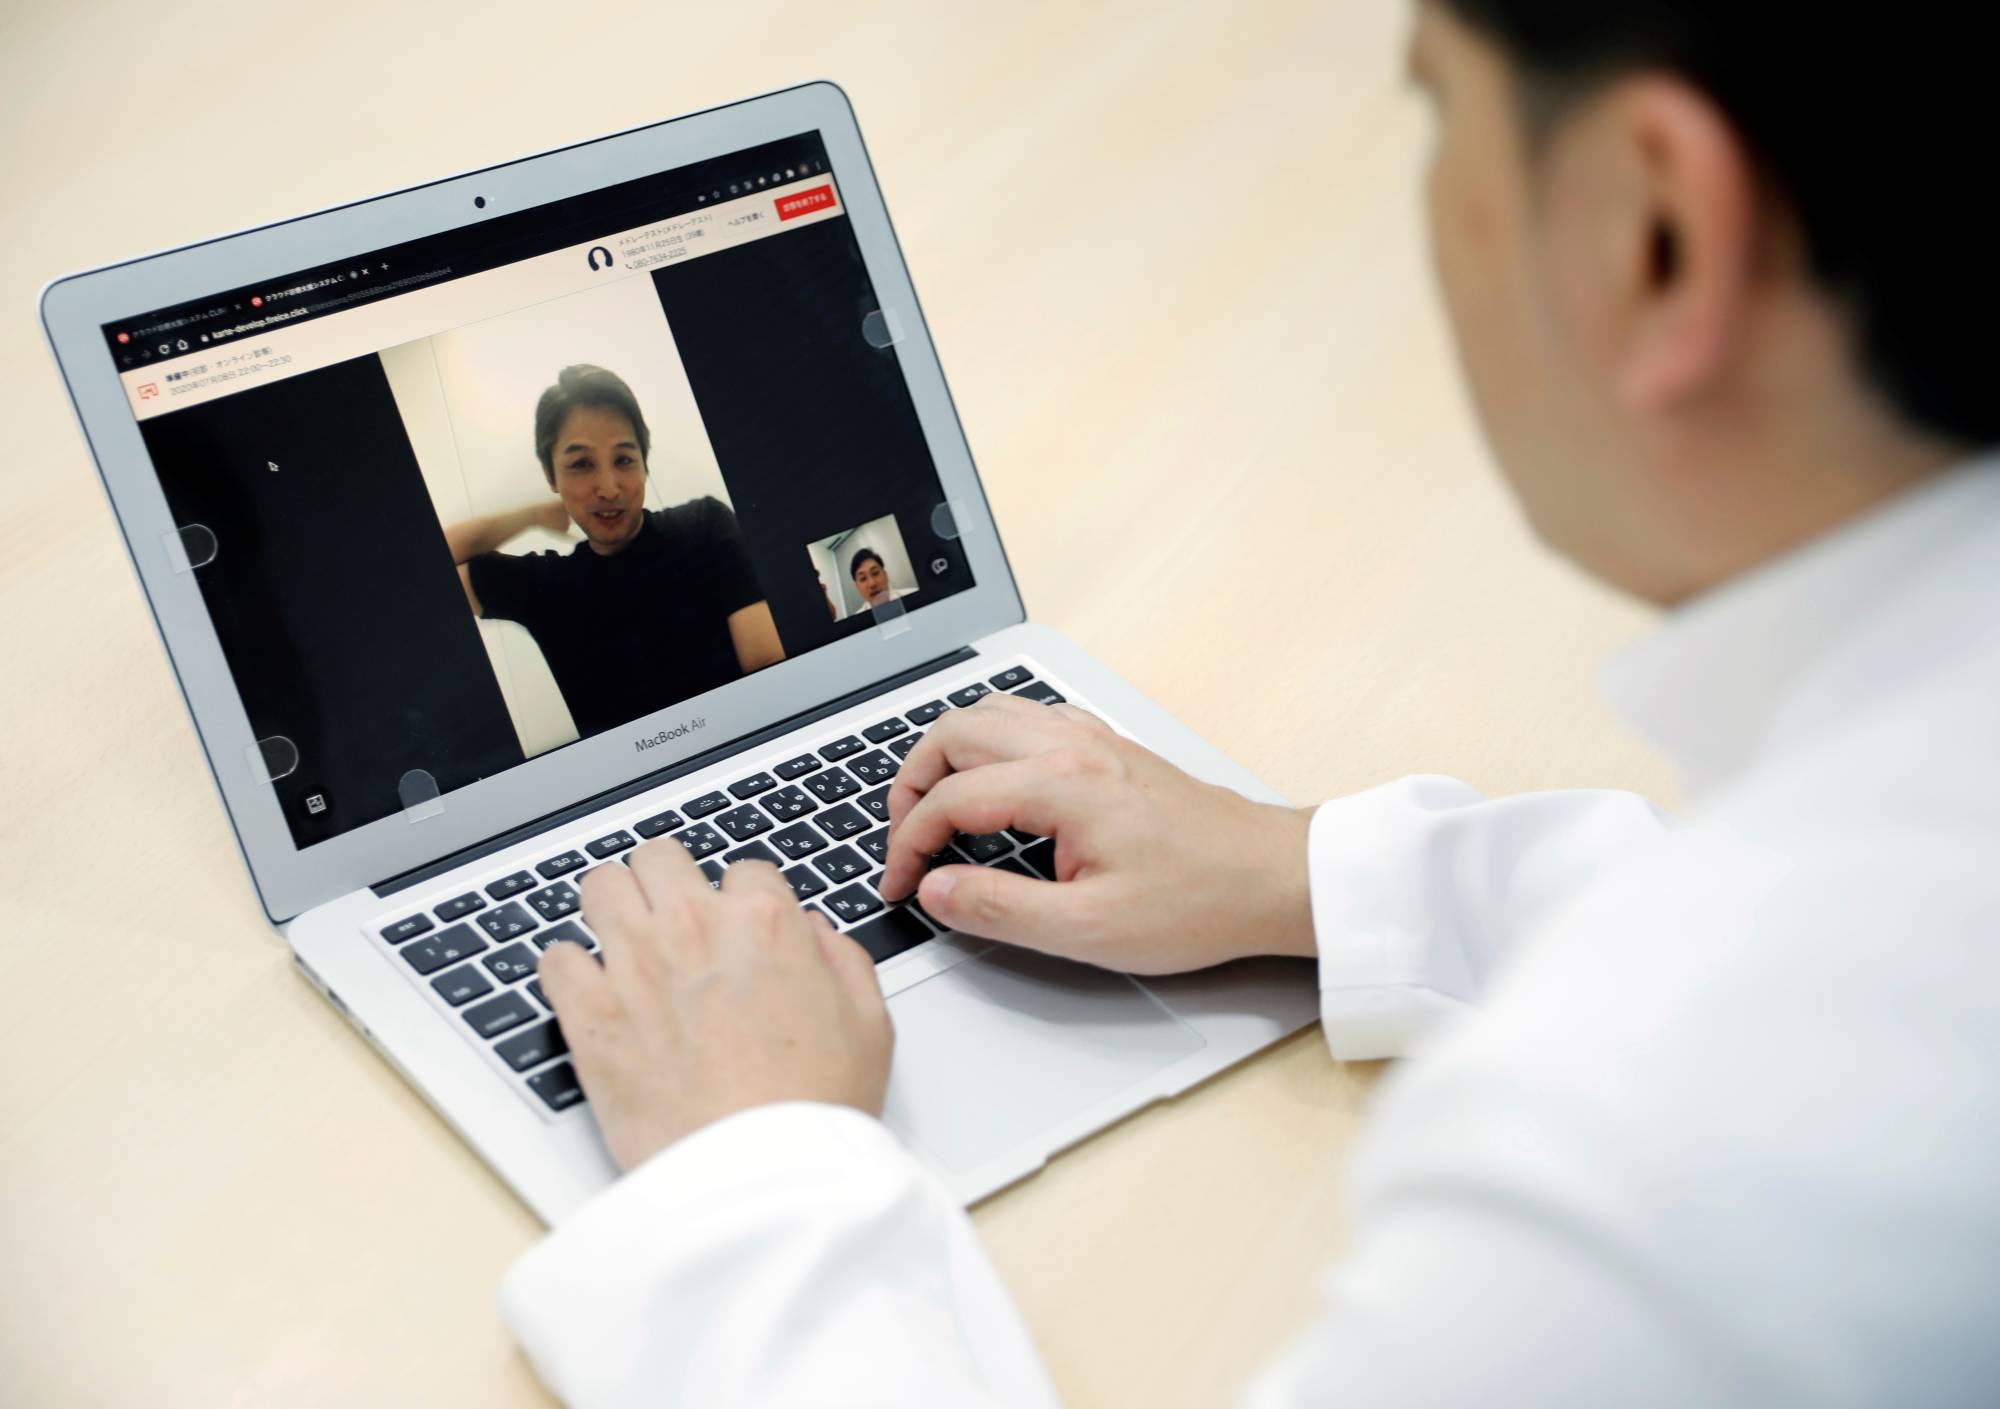 Medical doctor Makoto Kitada demonstrates a telemedicine application service called 'CLINICS', developed by medical start-up Medley Inc., in Tokyo on Wednesday. | REUTERS